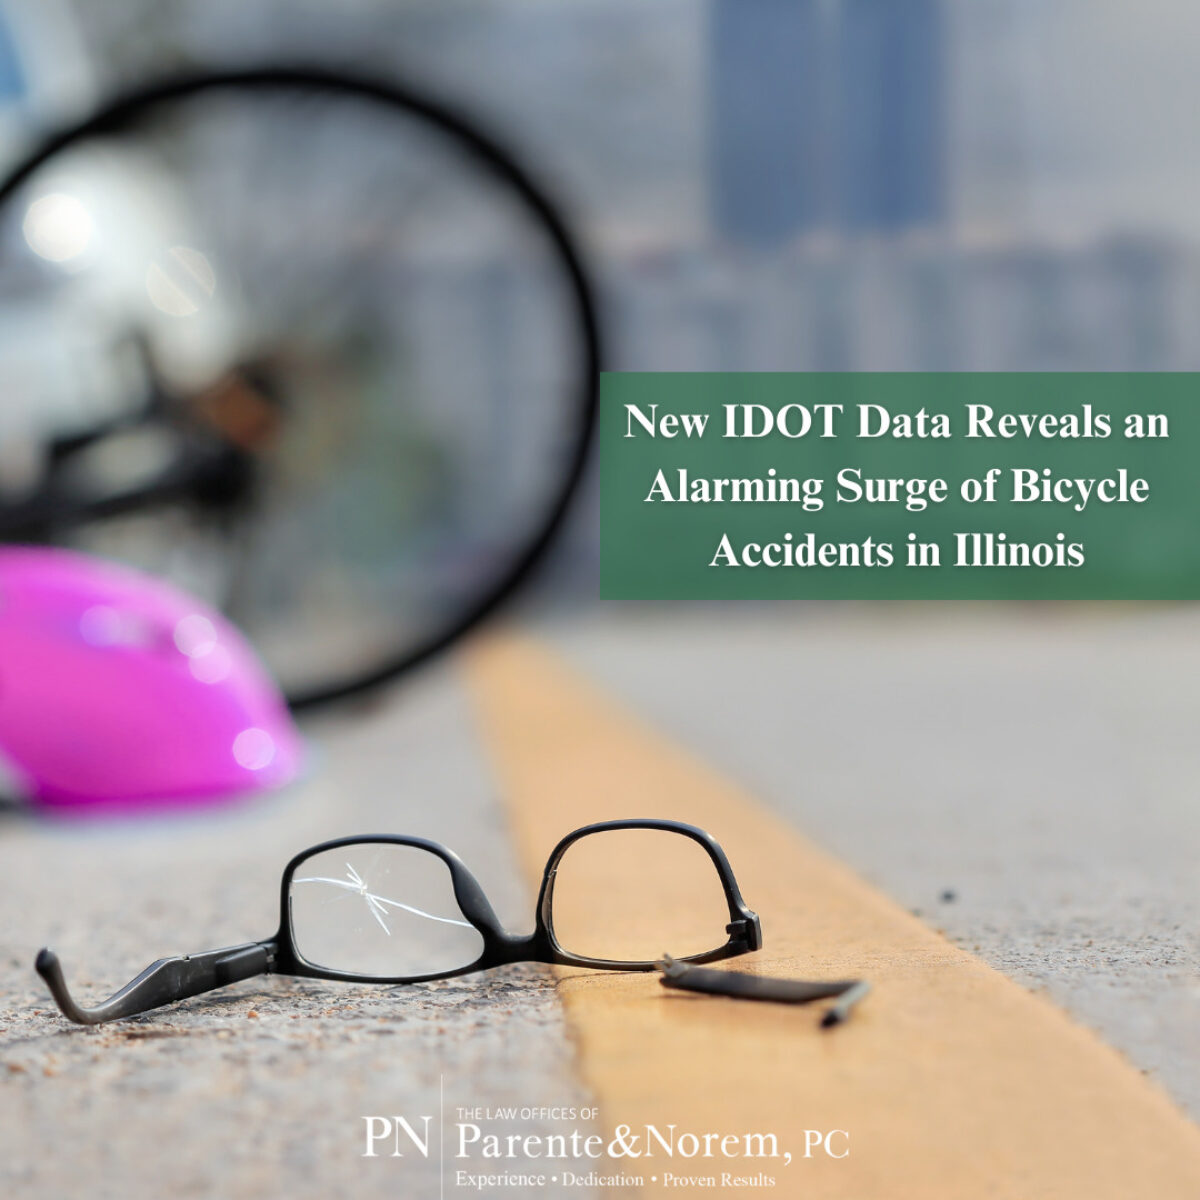 P&N BLOG | New IDOT Data Reveals an Alarming Surge of Bicycle Accidents in Illinois